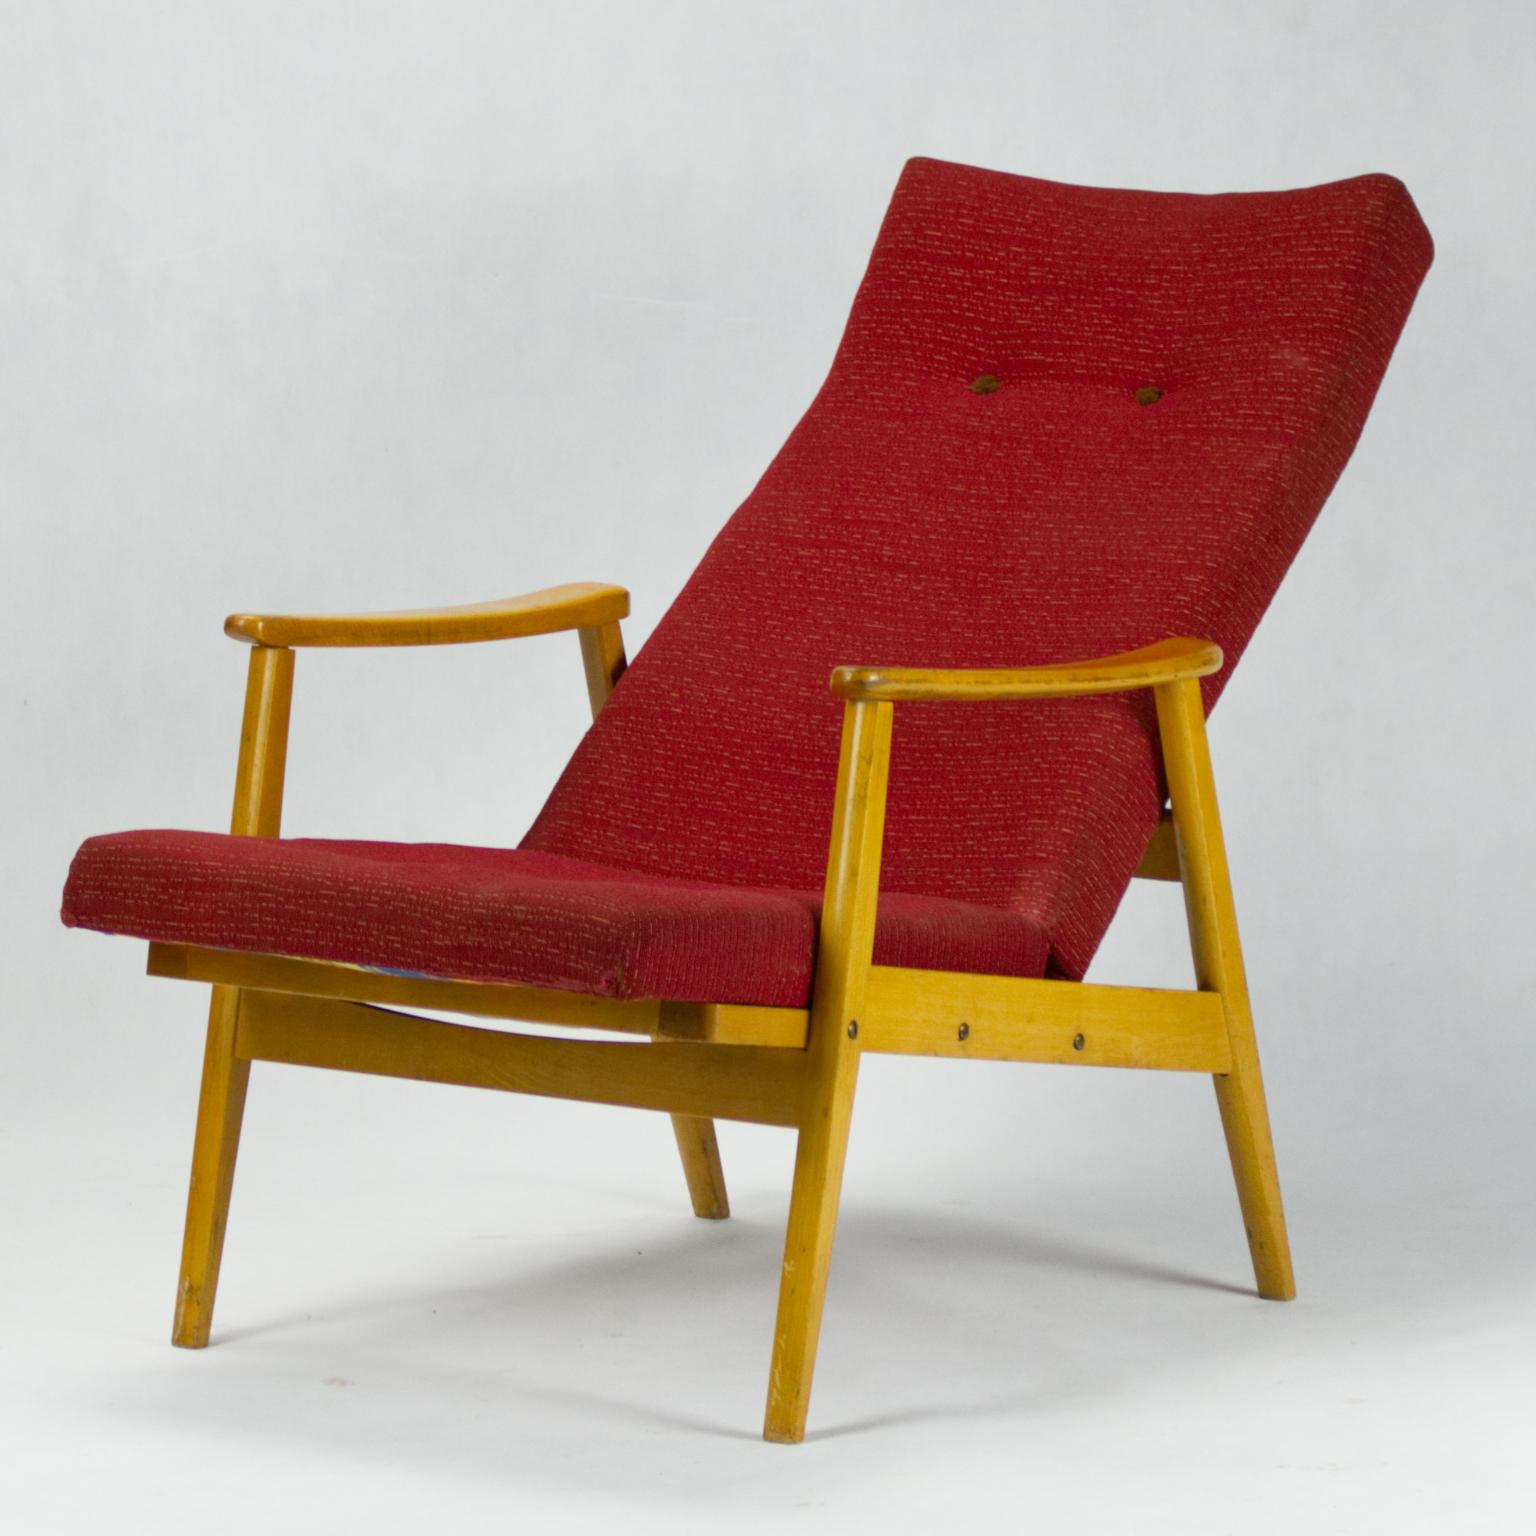 Czechoslovakian armchair by TON with high reclining backrest in original condition.